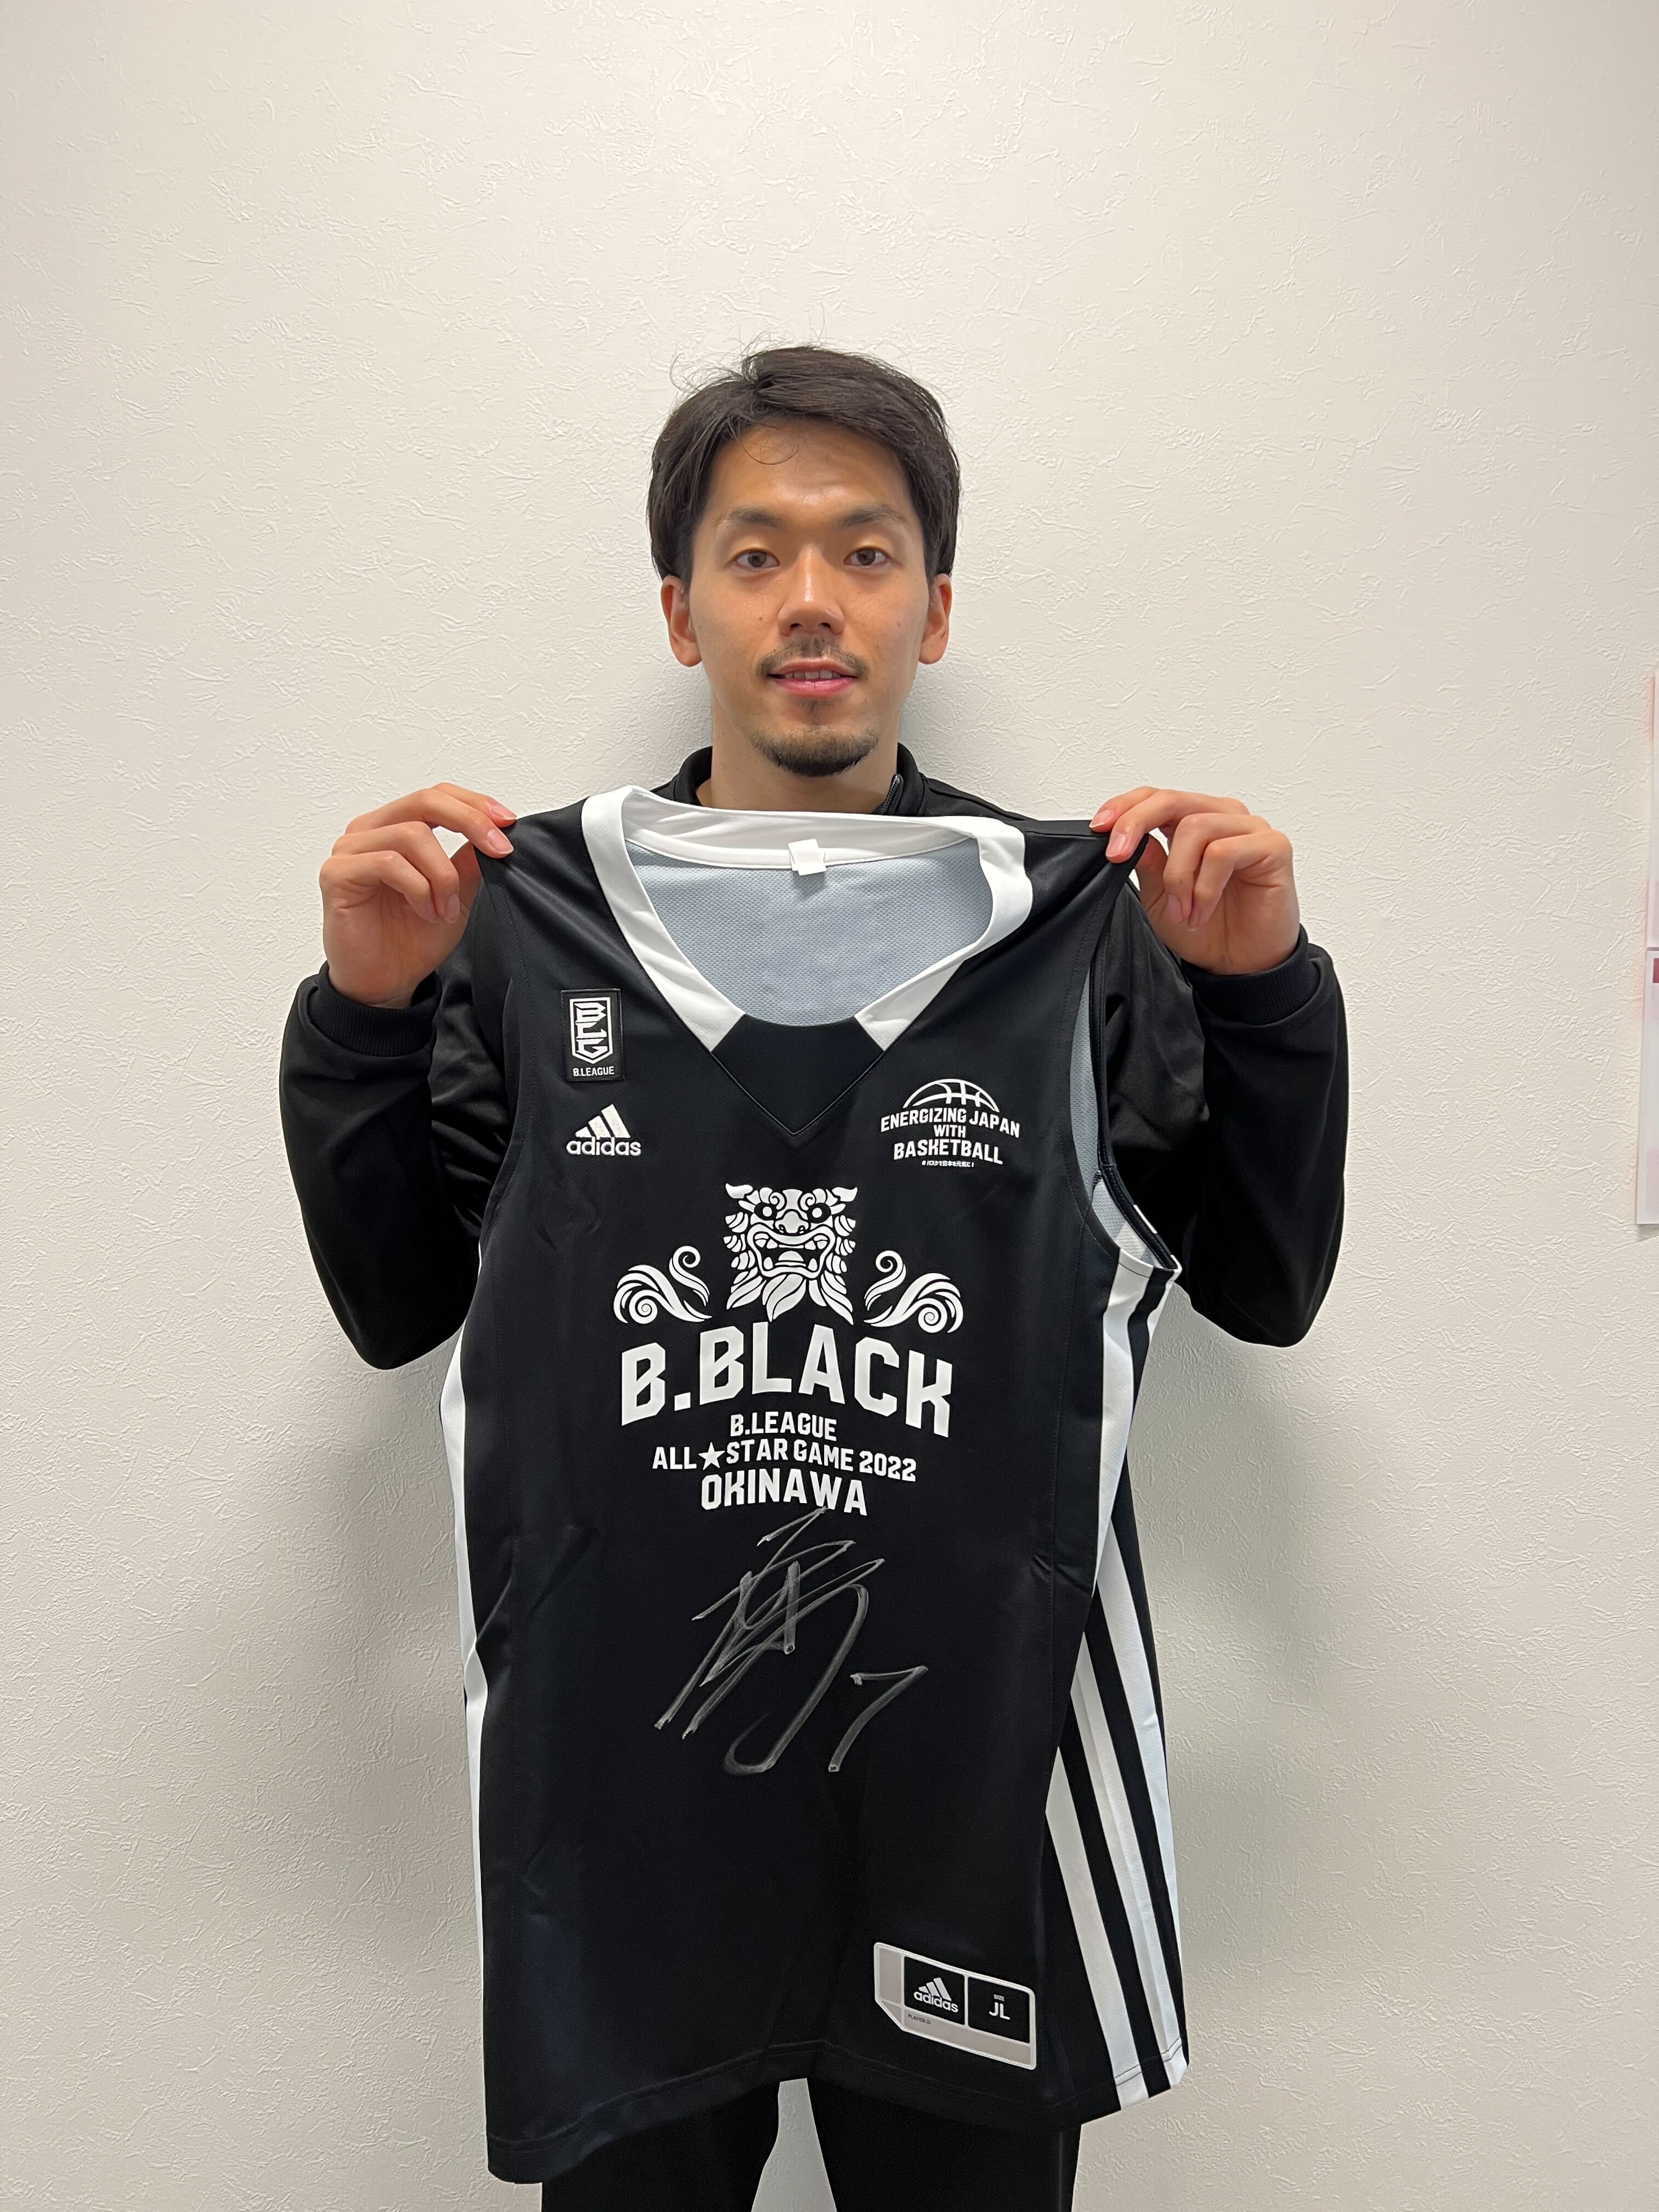 B.LEAGUE ALL-STAR GAME 2022 IN OKINAWAチャリティーオークション」を